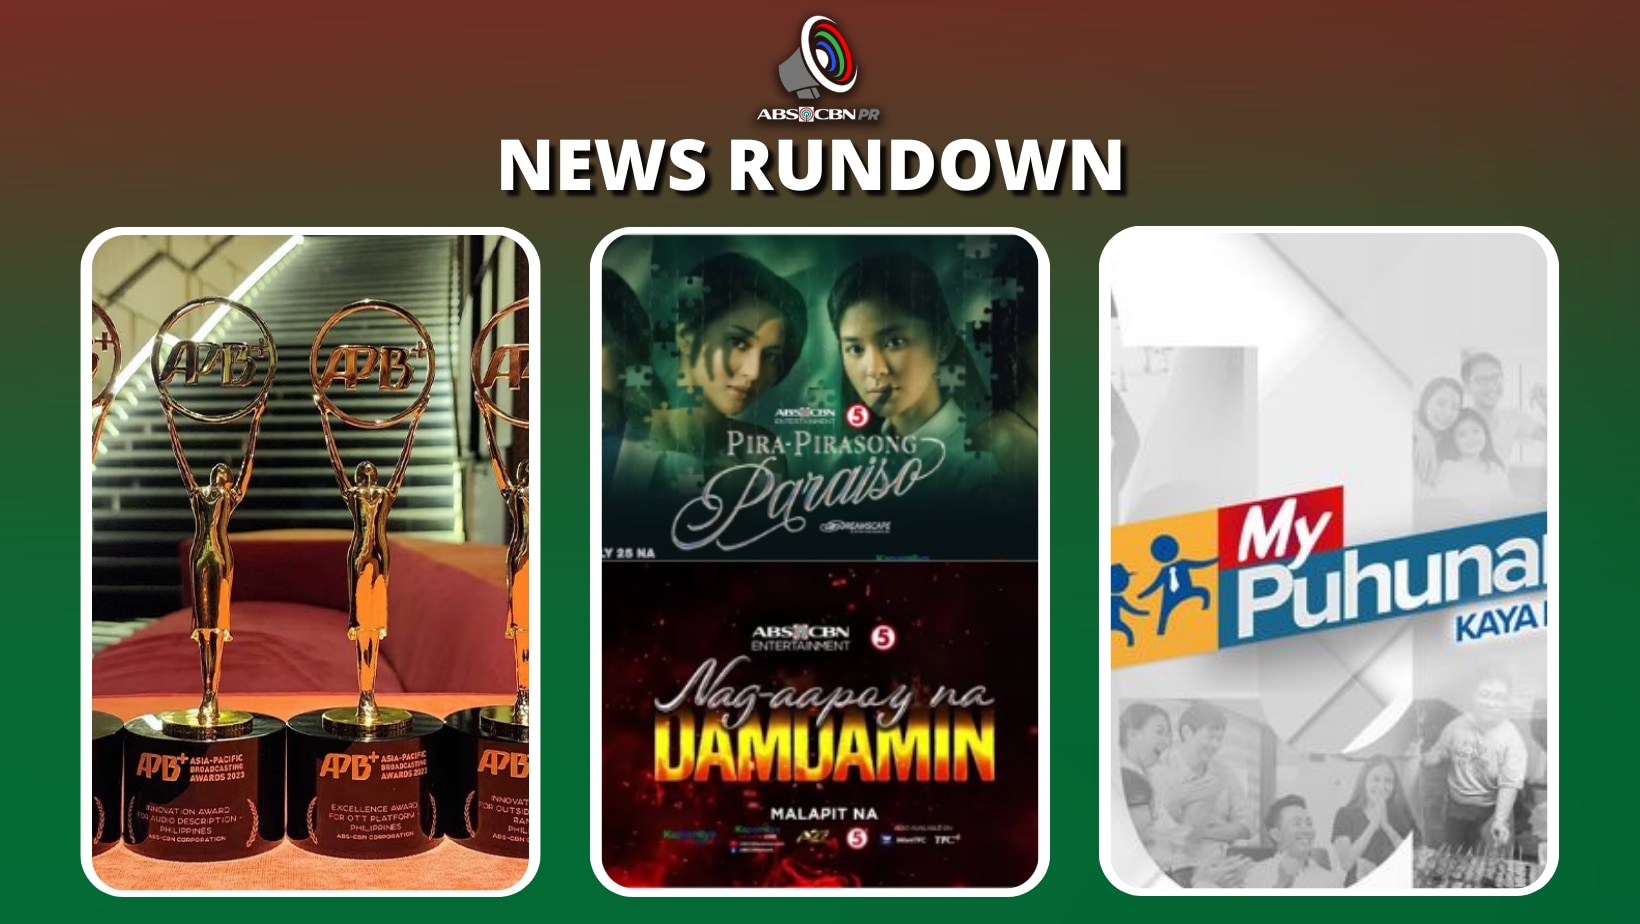 ABS-CBN and TV5 launch two afternoon drama series